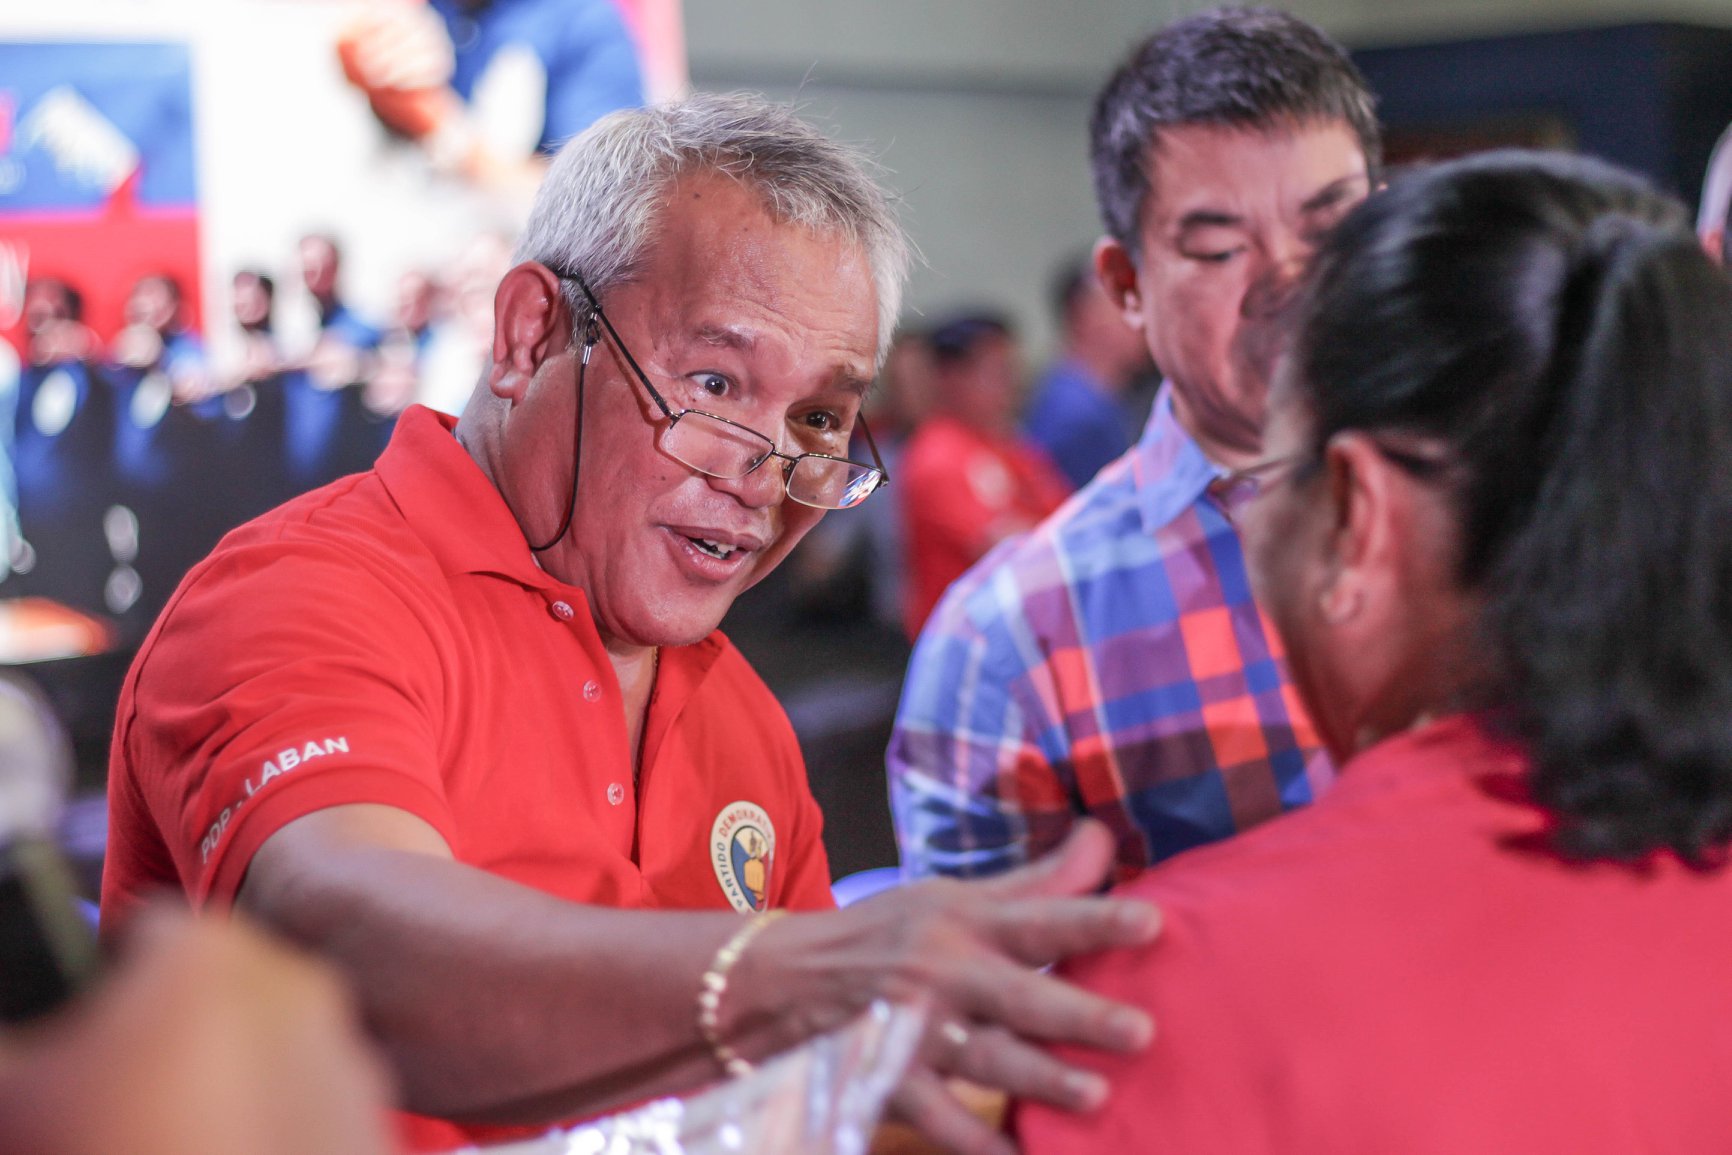 Cagayan de Oro City Mayor Oscar Moreno has shortened the curfew period in Northern Mindanao’s capital by three hours as the threat of COVID-19 has decreased